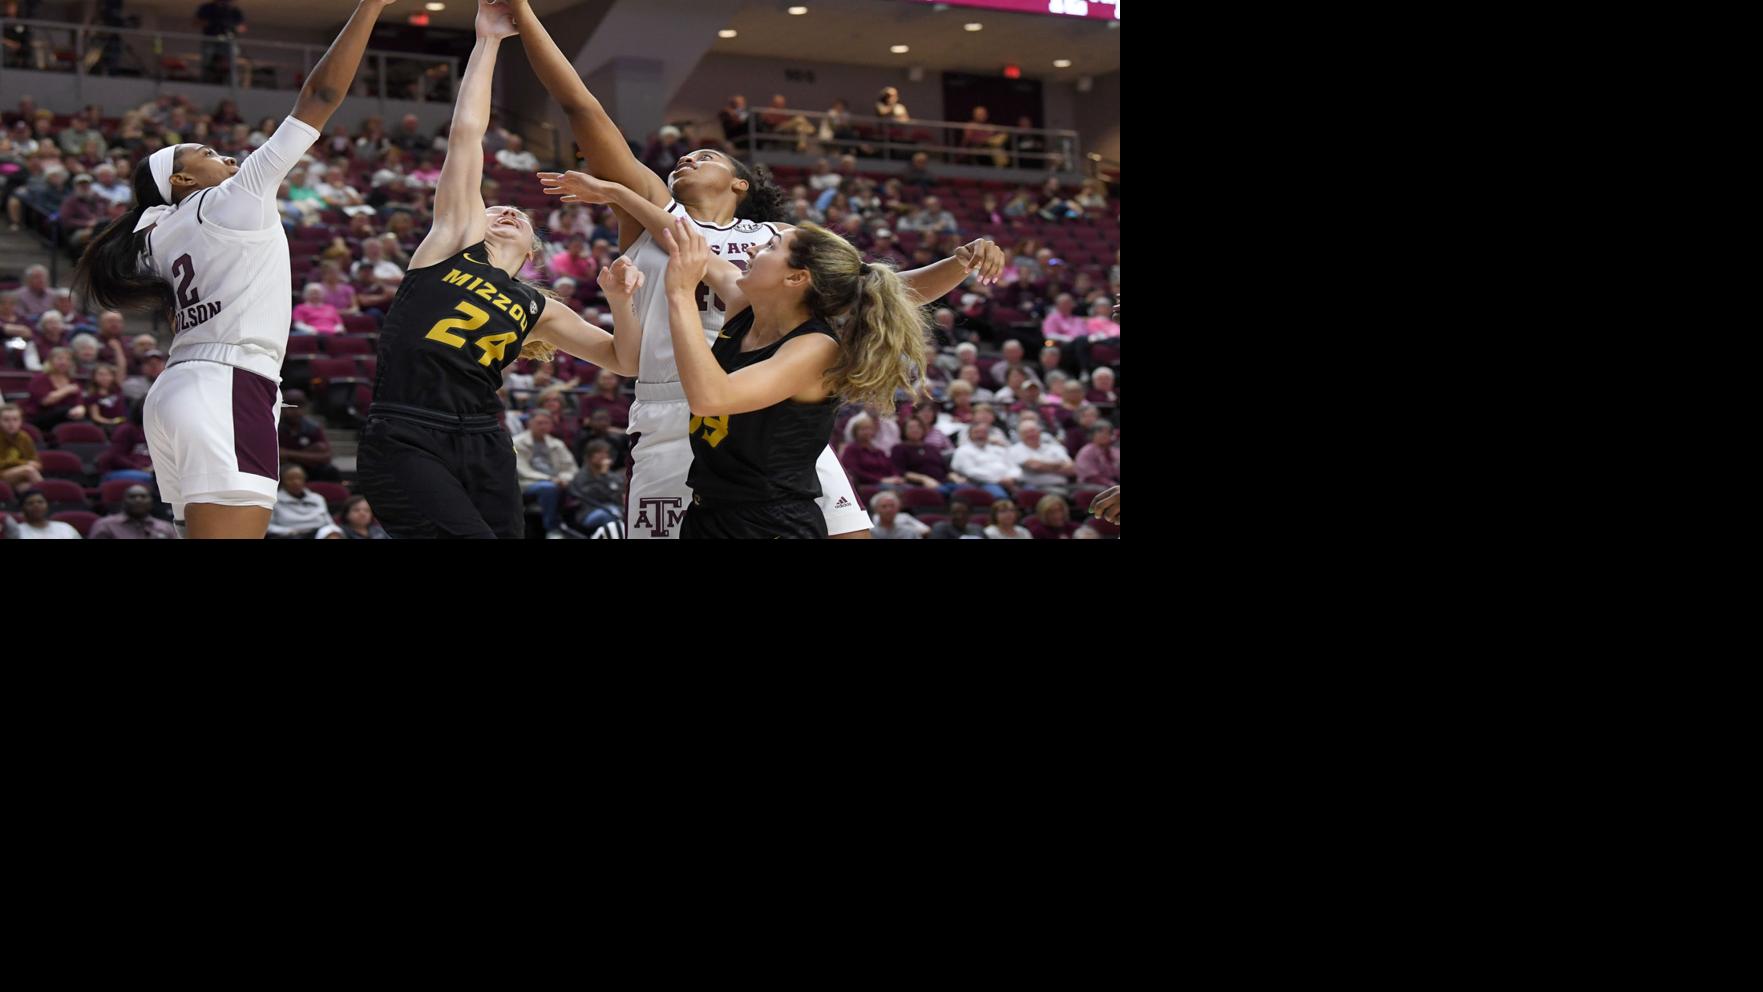 Texas A&M women's basketball team ready for rematch with LSU